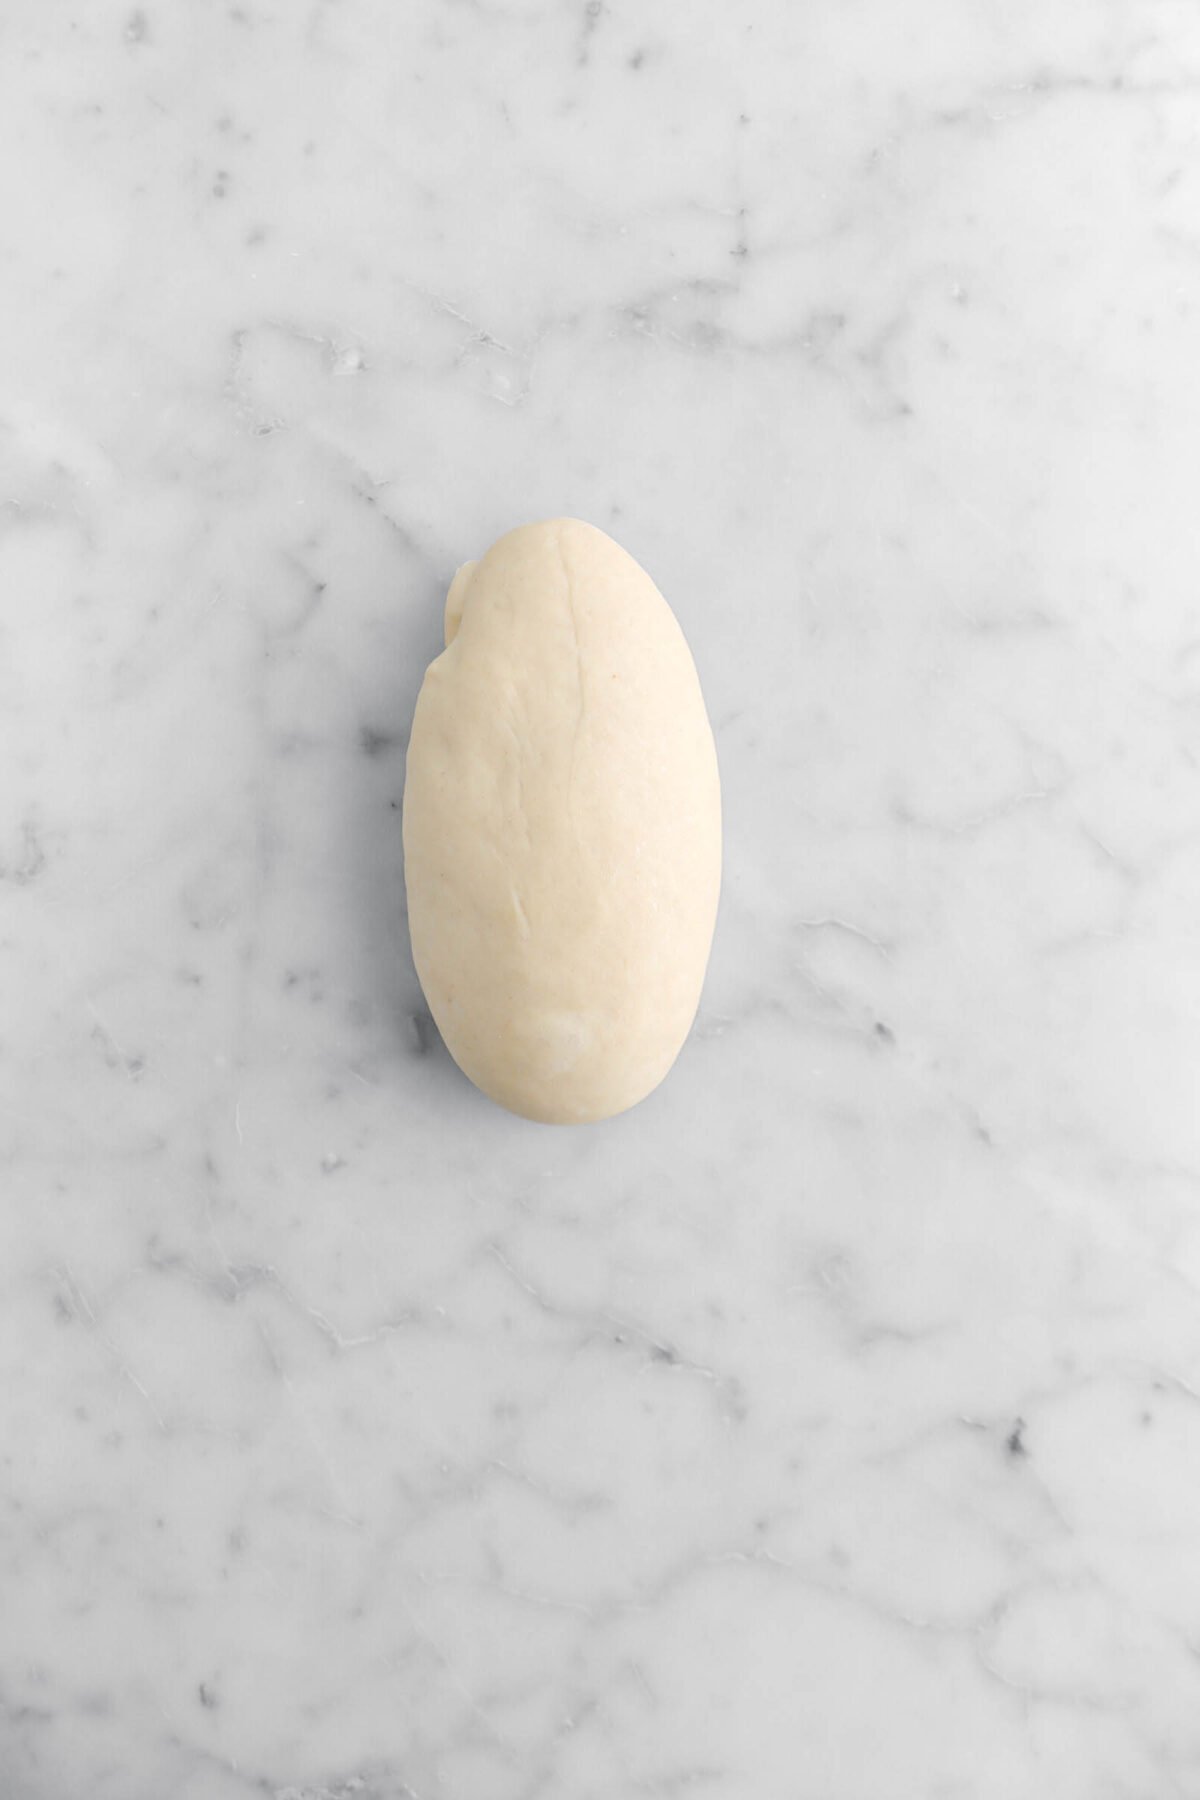 oval shaped dough on marble surface.